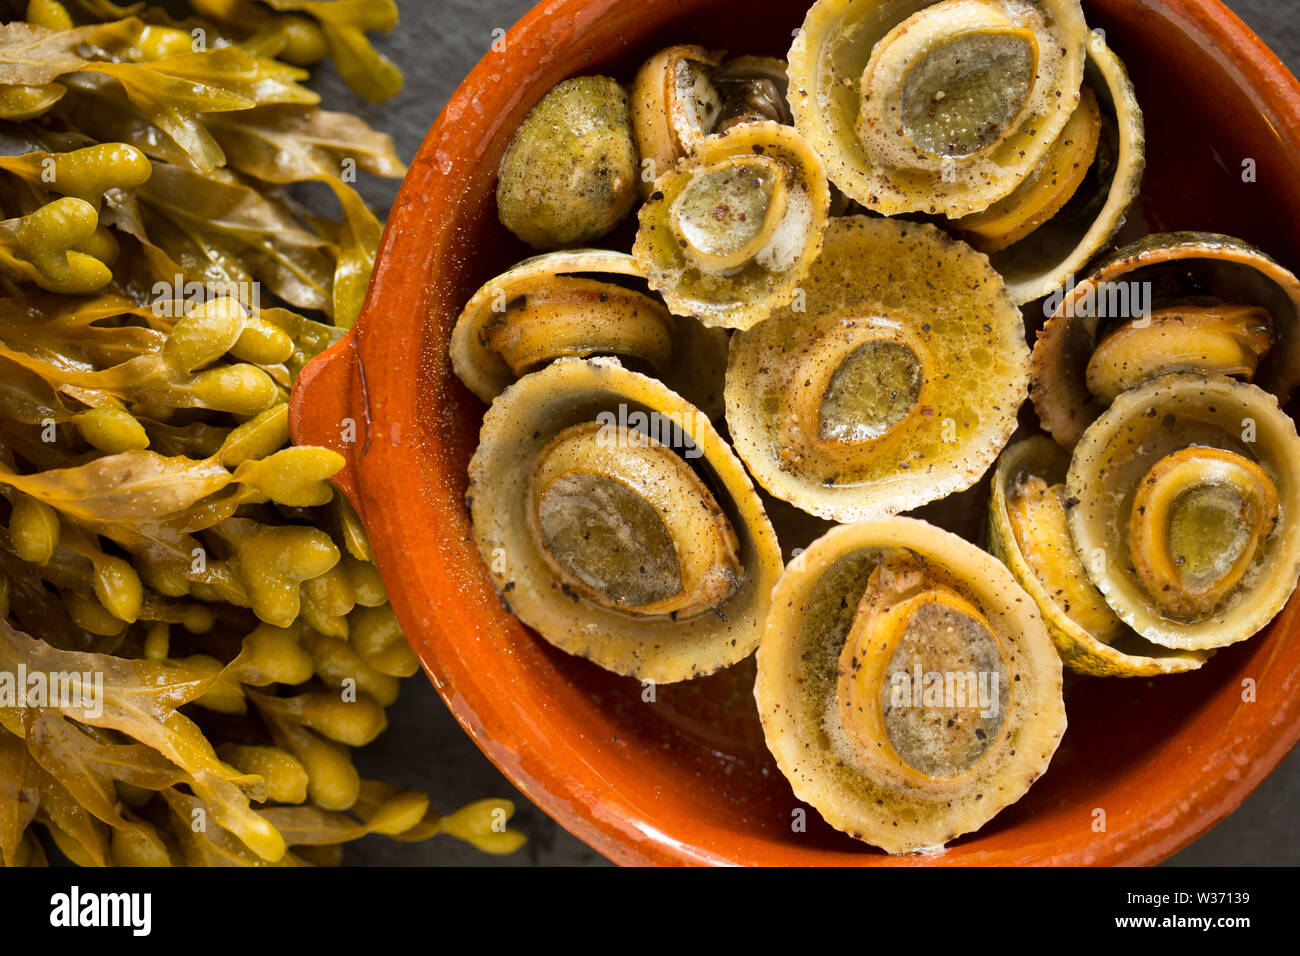 Commom limpets, Patella vulgata, that have been gathered while seashore foraging in Dorset. That have been used to make a dish popular in the Azores c Stock Photo